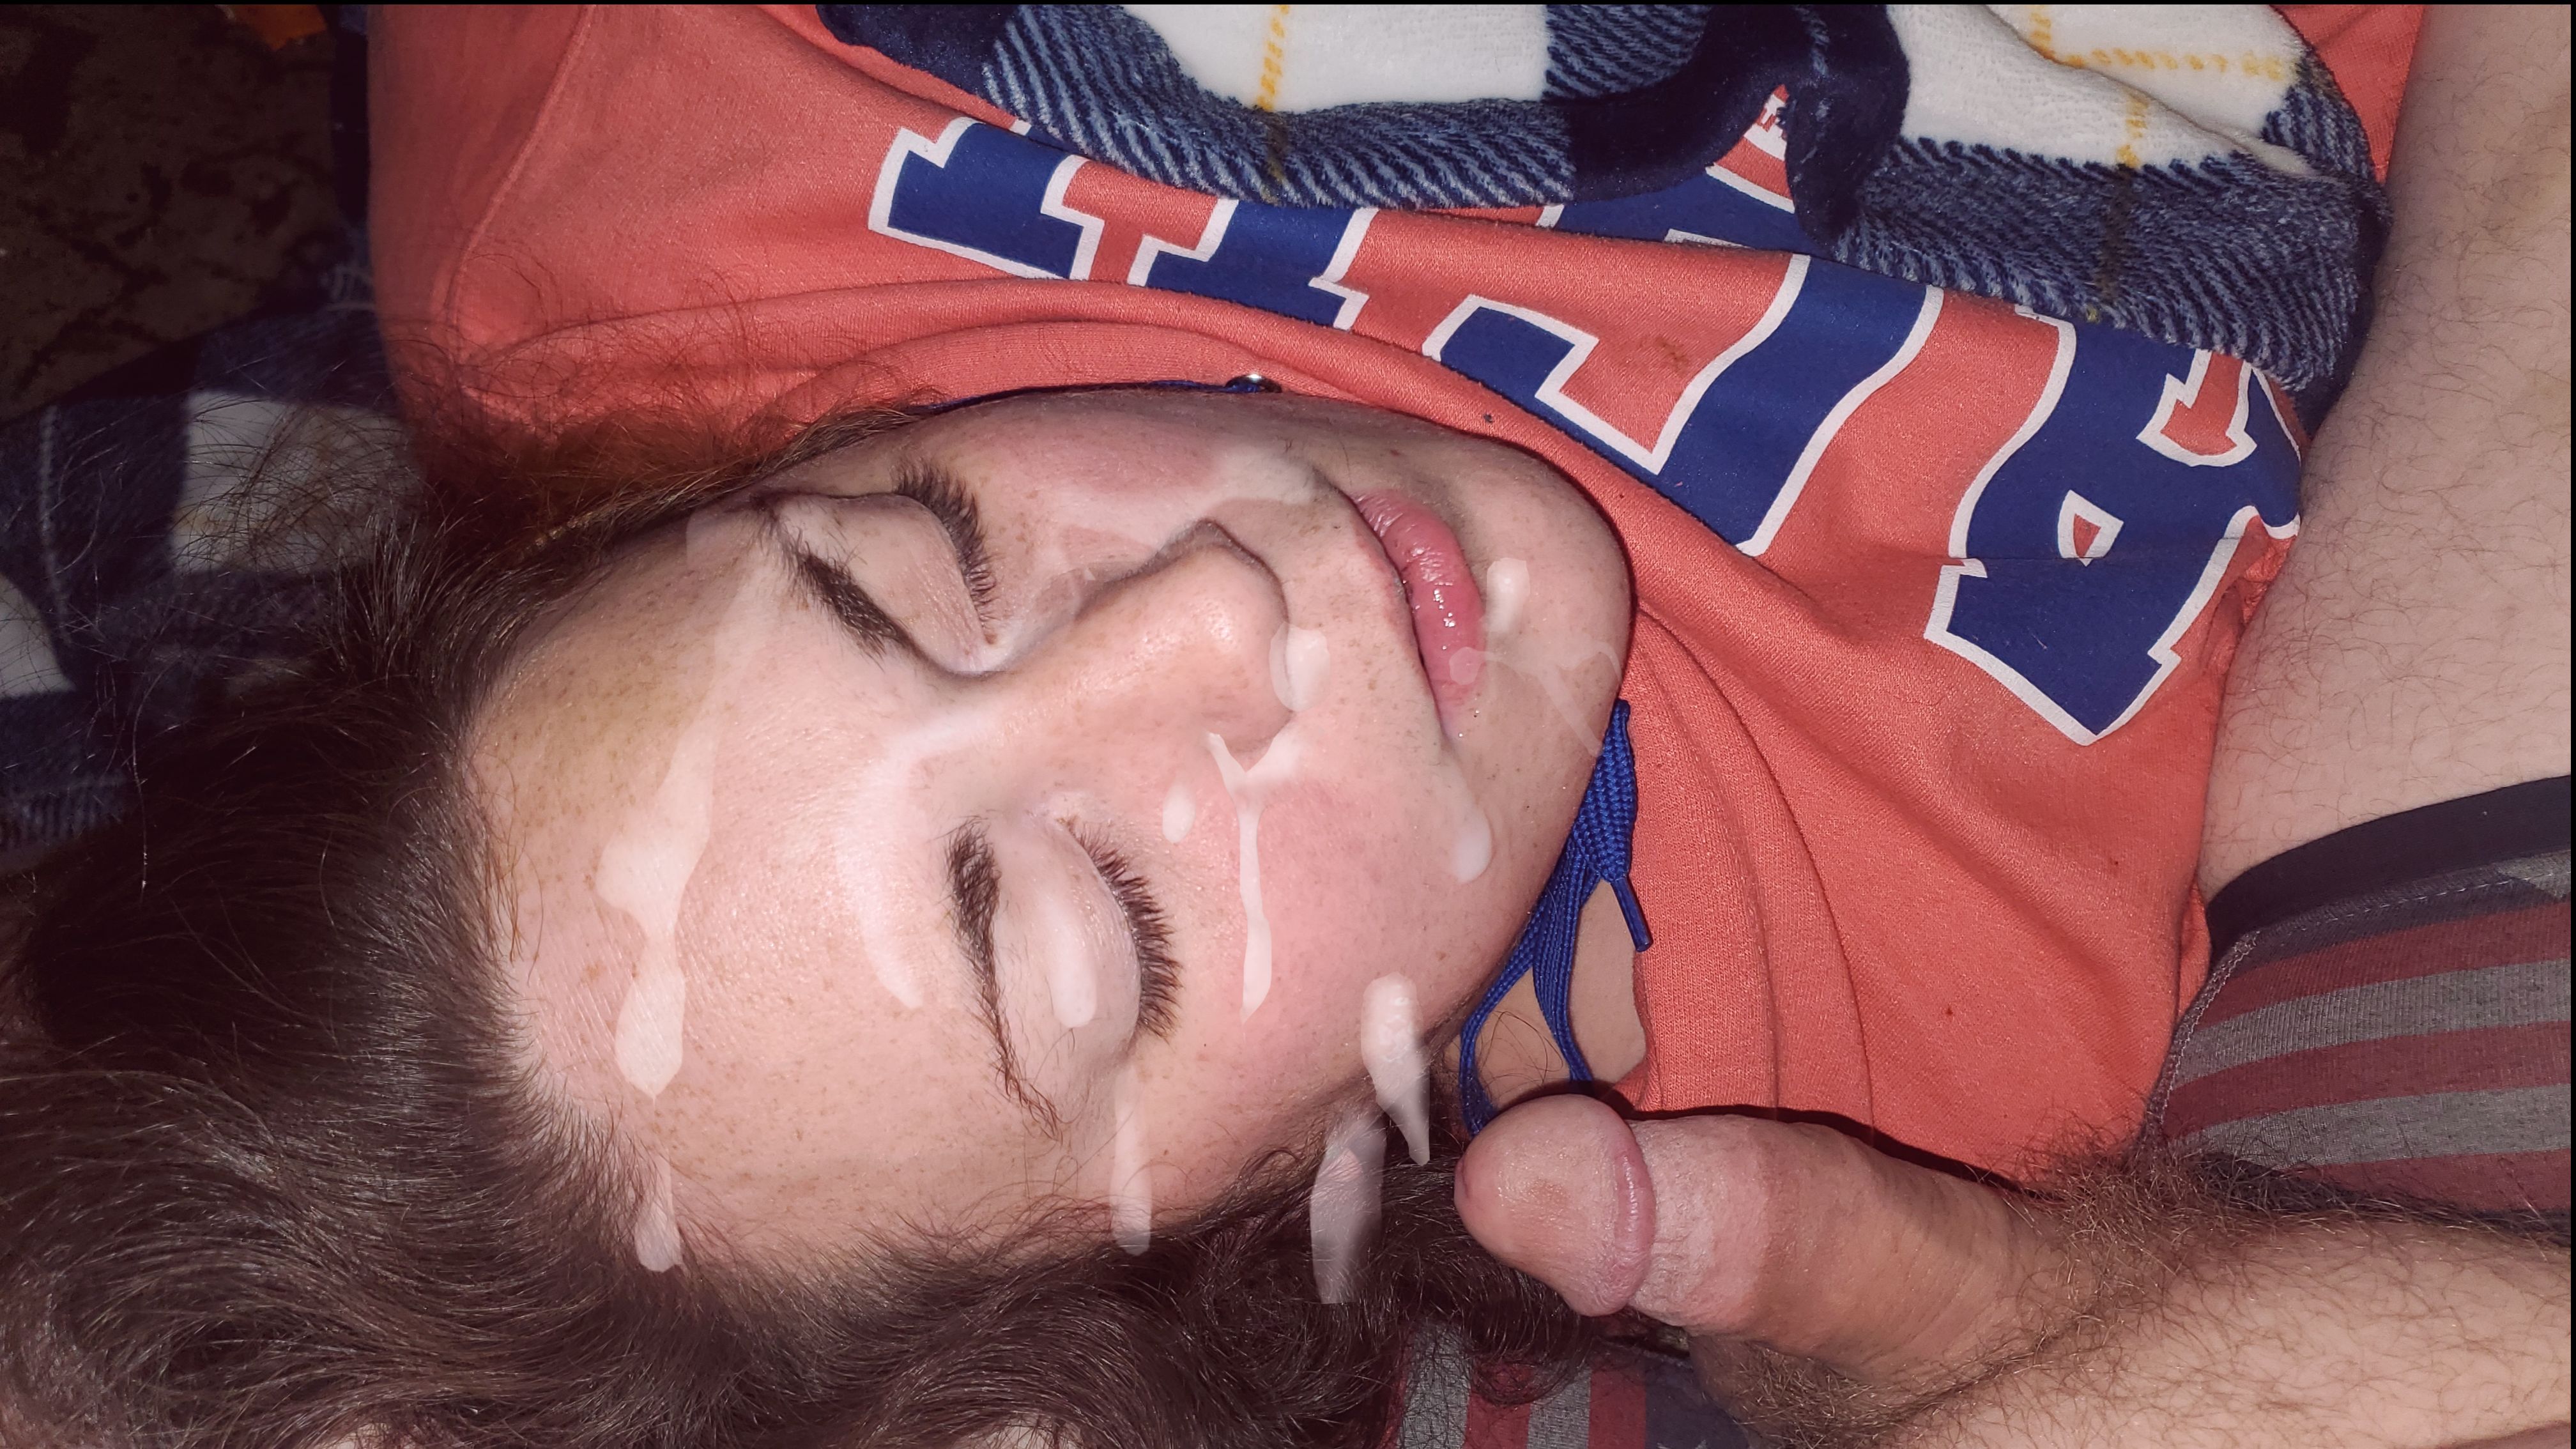 Cum on my face while sleeping story